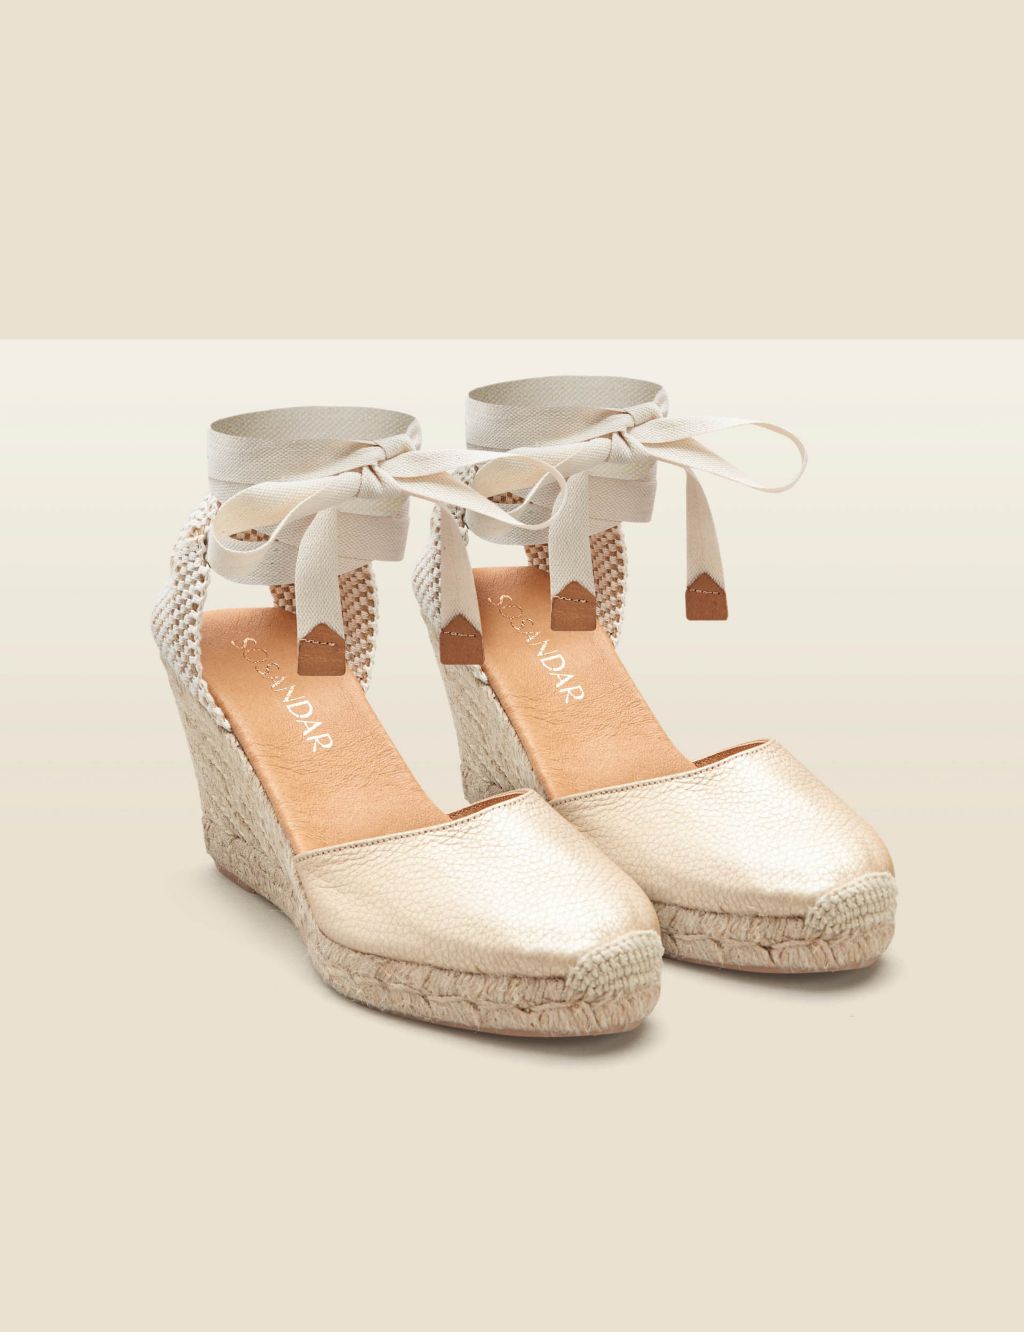 Leather Ankle Tie Wedge Espadrilles image 2